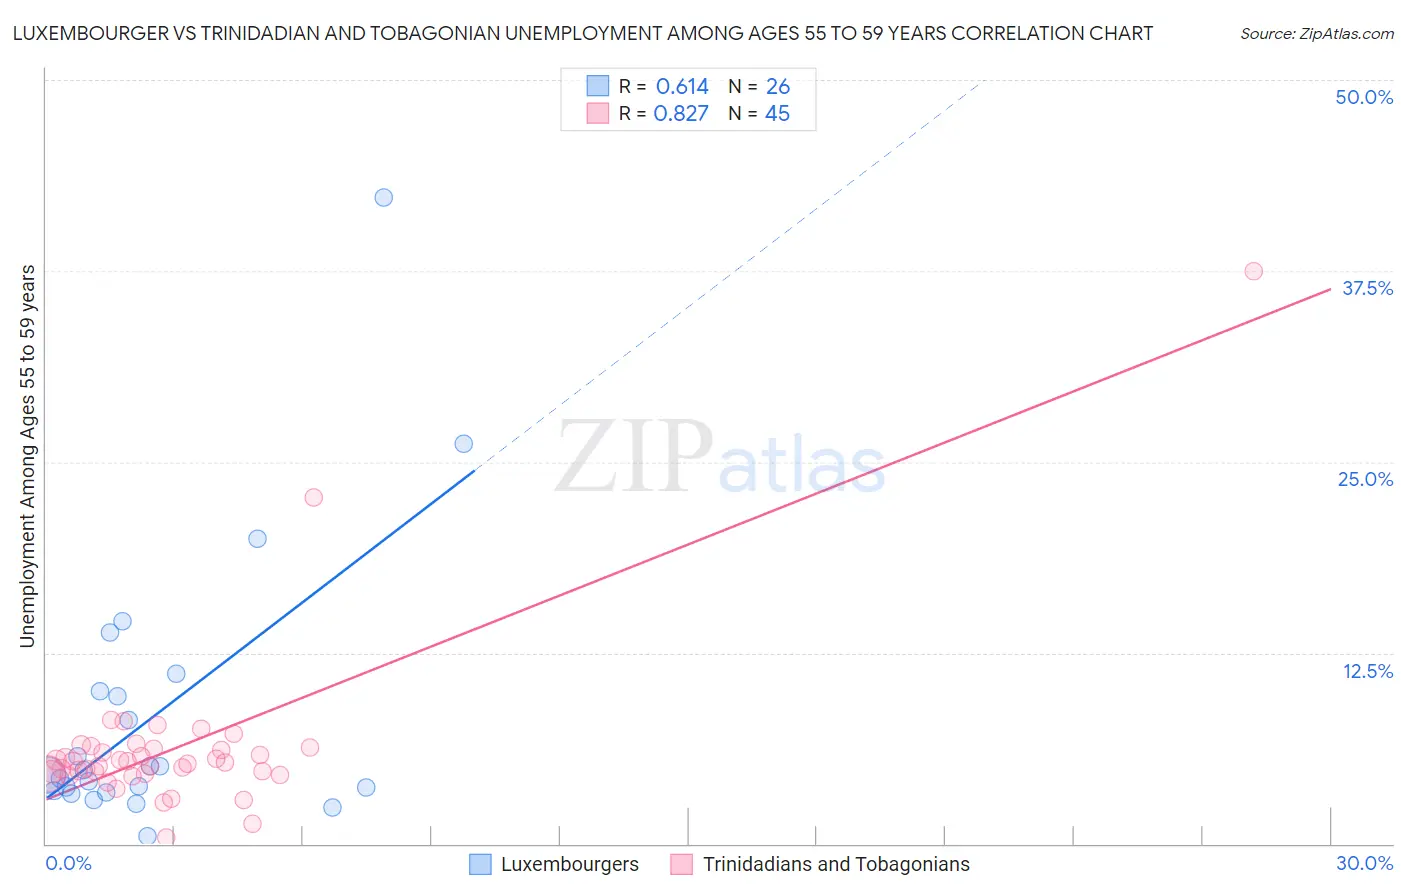 Luxembourger vs Trinidadian and Tobagonian Unemployment Among Ages 55 to 59 years